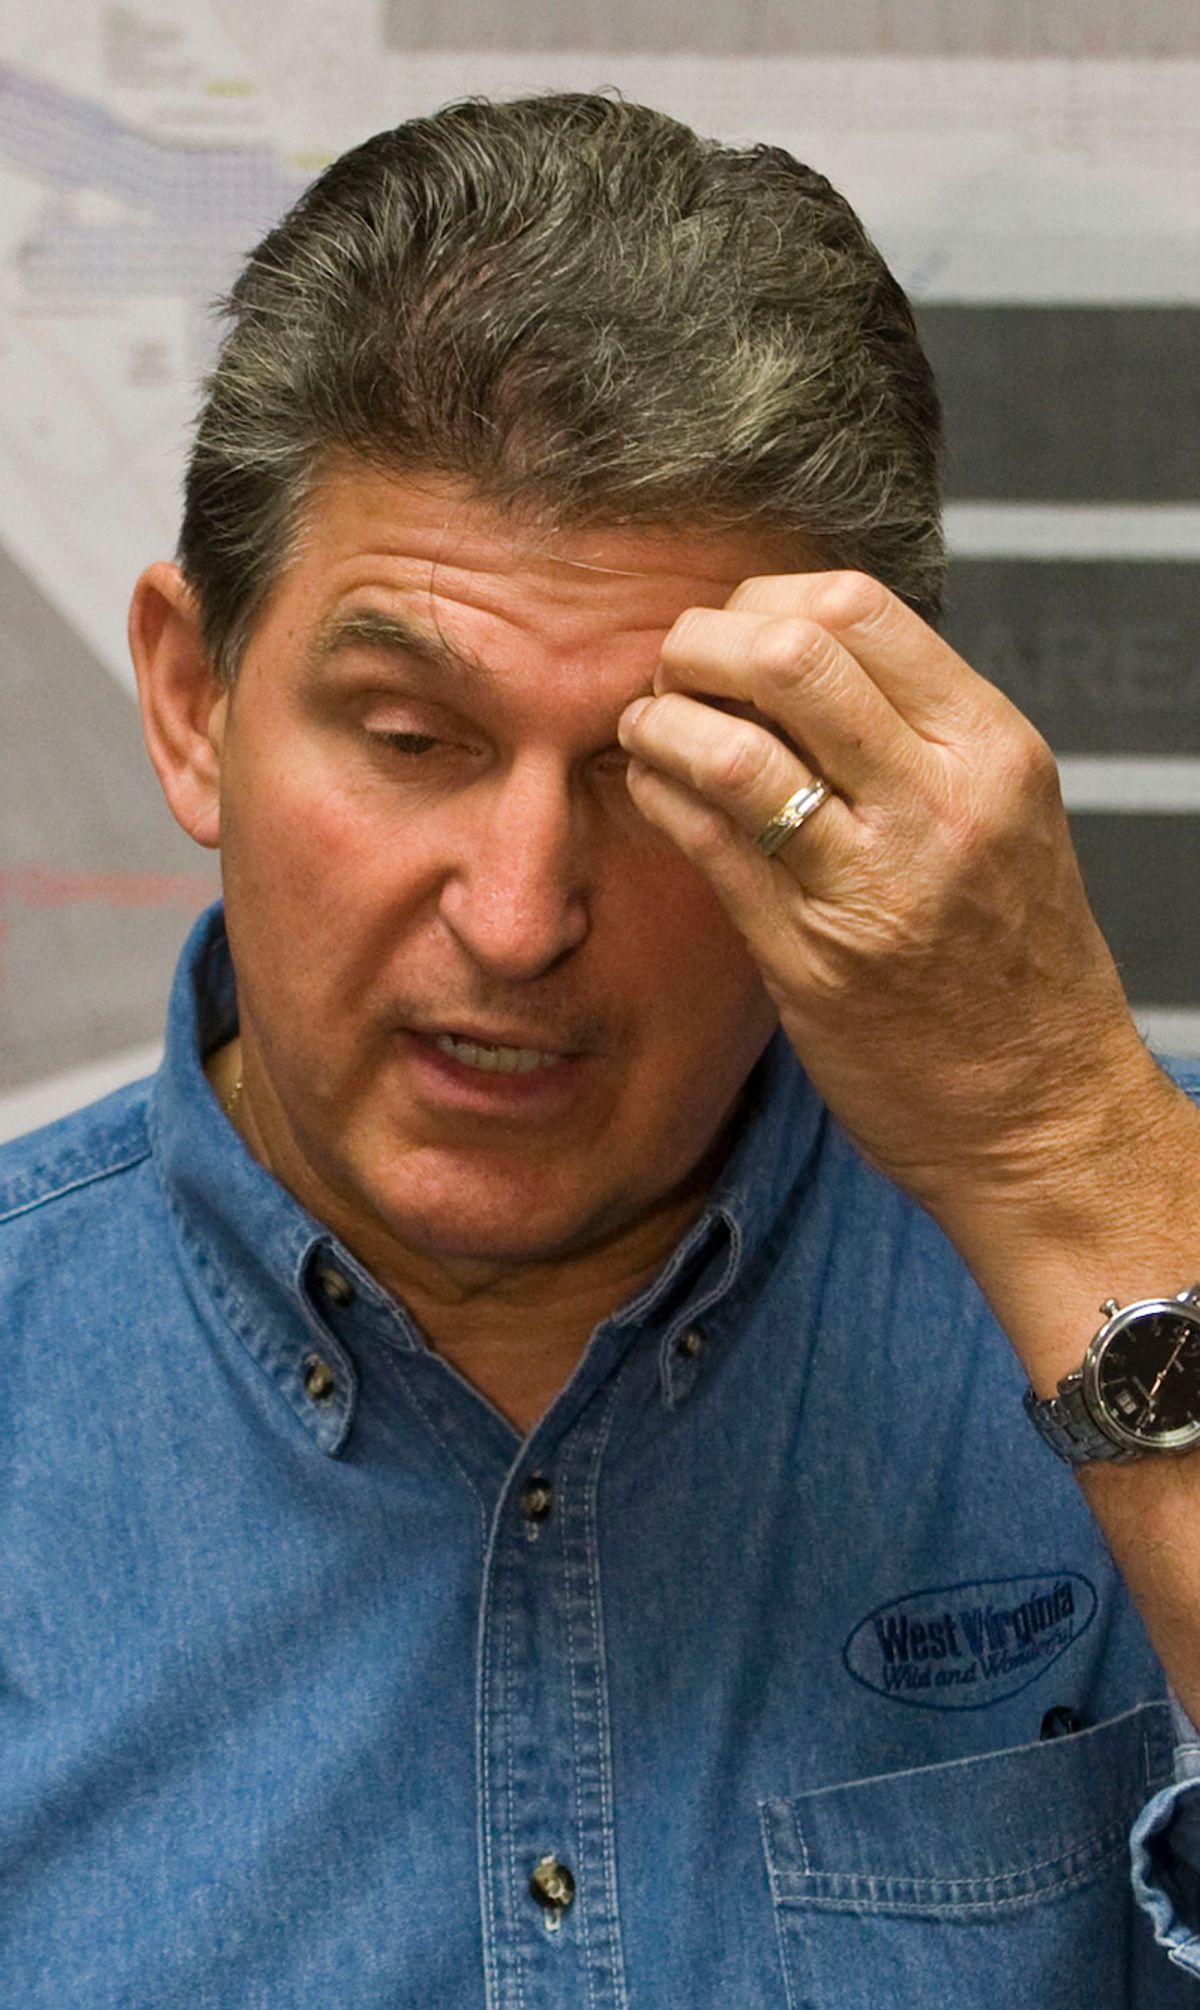 West Virginia Governor Joe Manchin gestures as he speaks during a news conference in Montcoal, West Virginia on April 7, 2010. Drills broke through into a West Virginia mine early on Wednesday but rescuers detected no sign of the four miners missing since an explosion killed 25 people in a major U.S. mine disaster.  REUTERS/Chris Keane (UNITED STATES - Tags: DISASTER ENERGY POLITICS)           (Â© Chris Keane / Reuters)